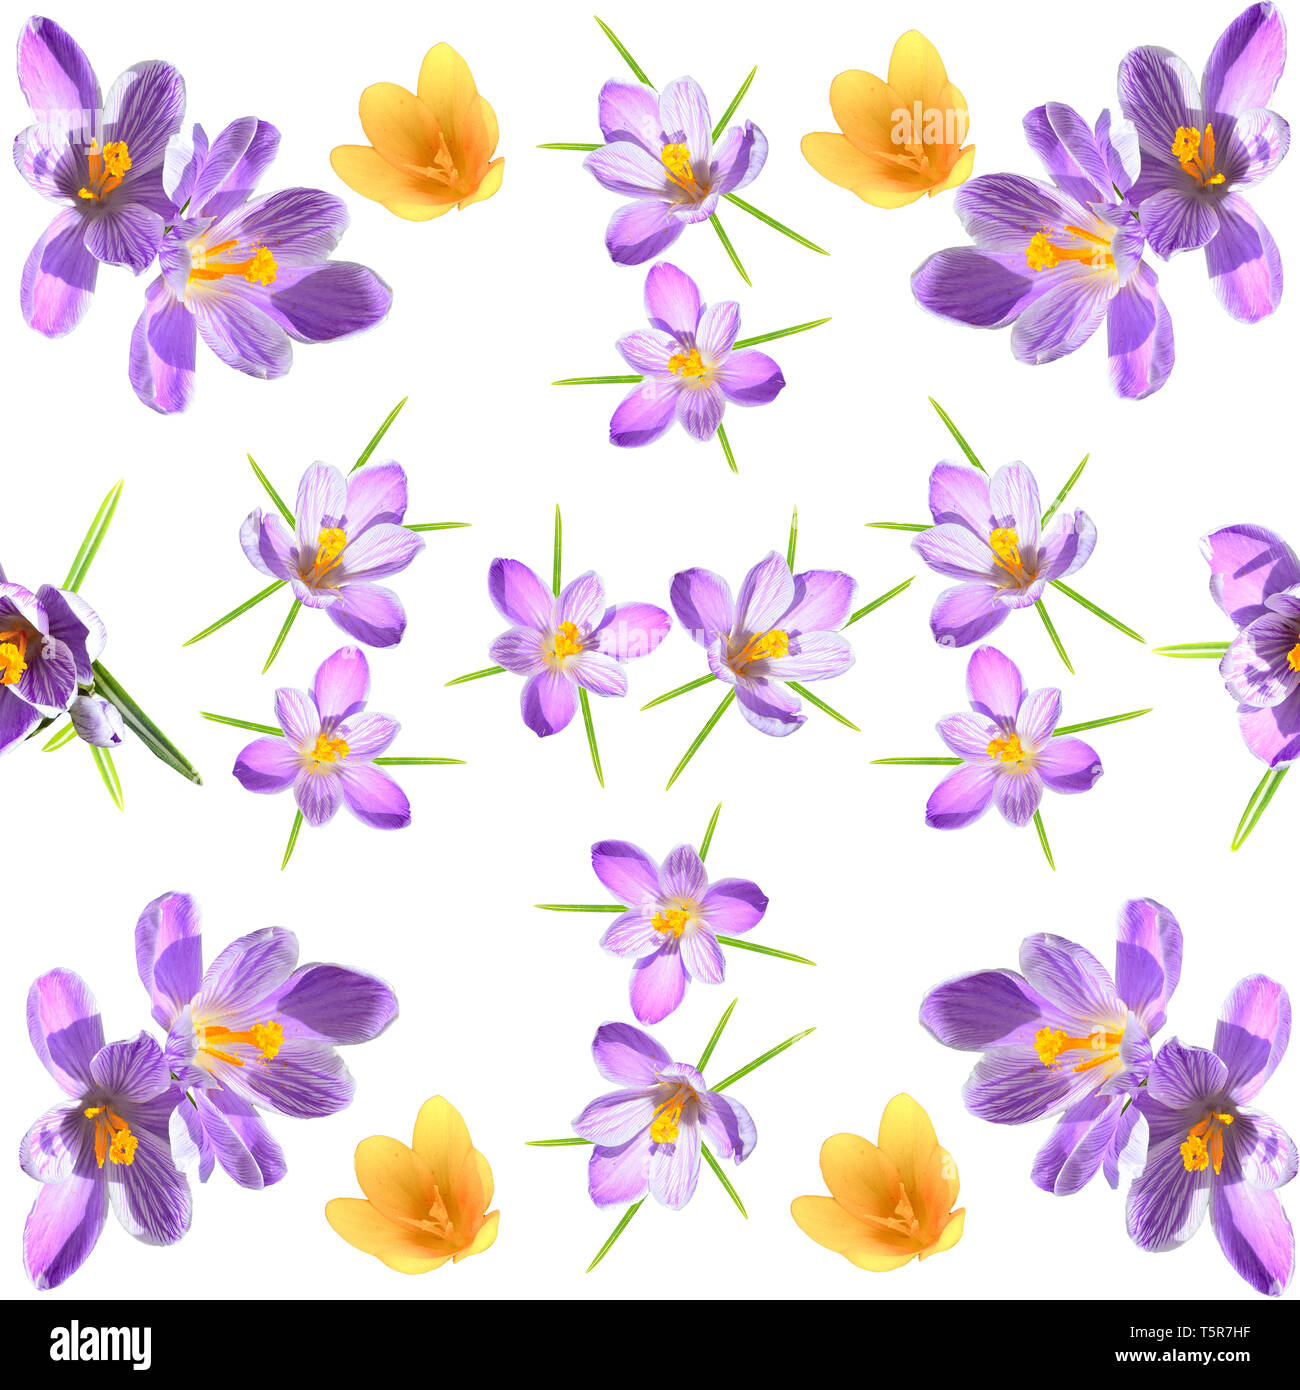 Spring floral seamless pattern with violet and yellow crokuses on white background. Floral photo collage for artistic design of fabric or wrapping Stock Photo